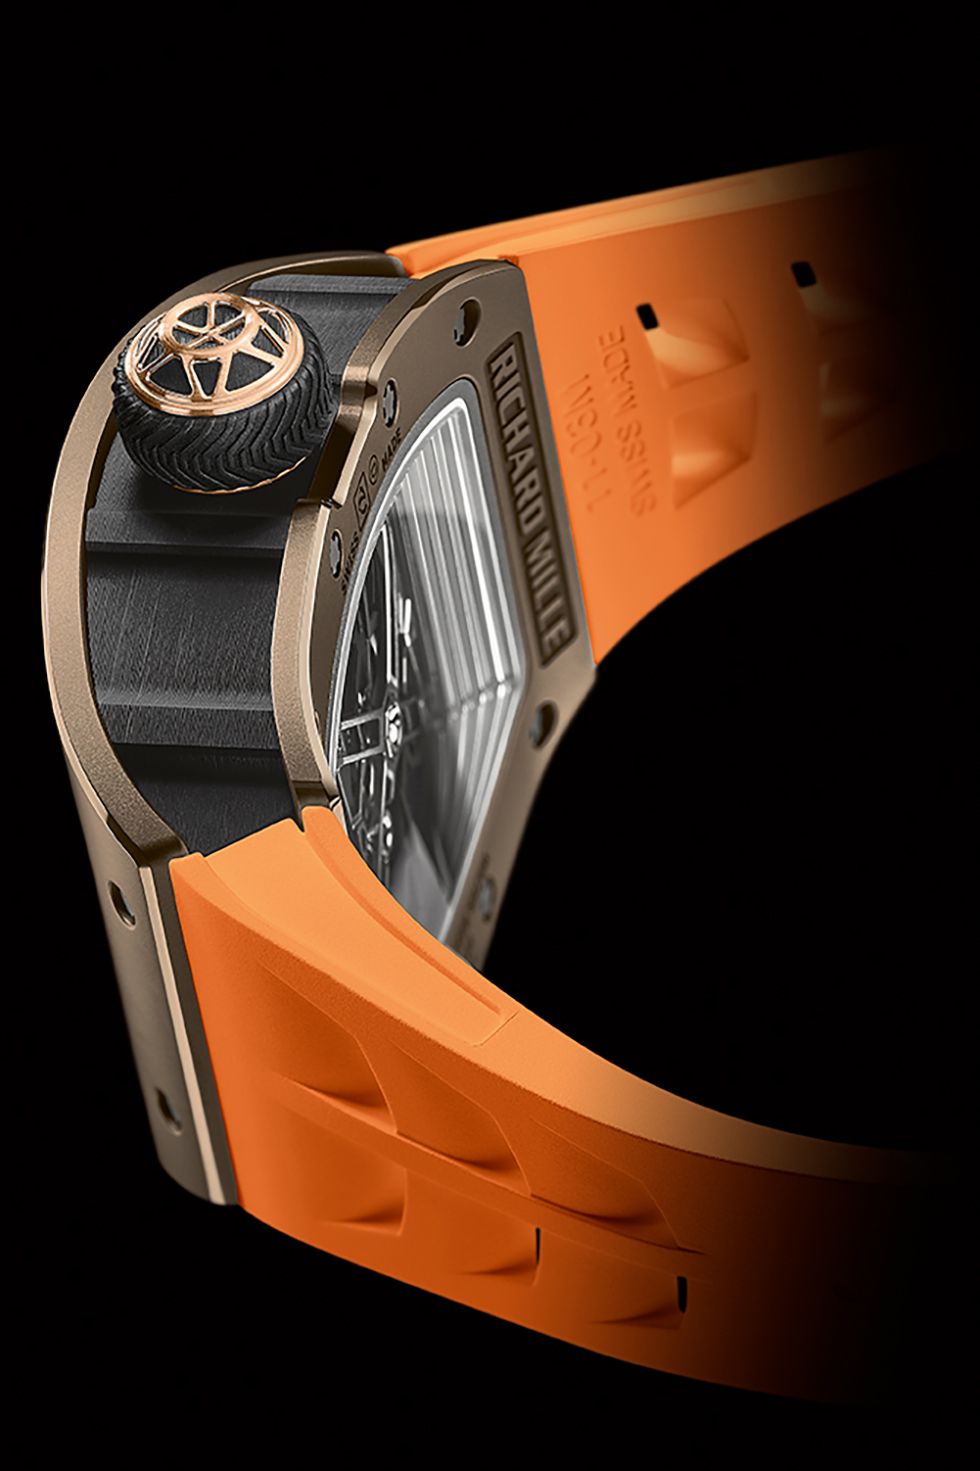 The Richard Mille RM52-05 designed by Pharrell Williams